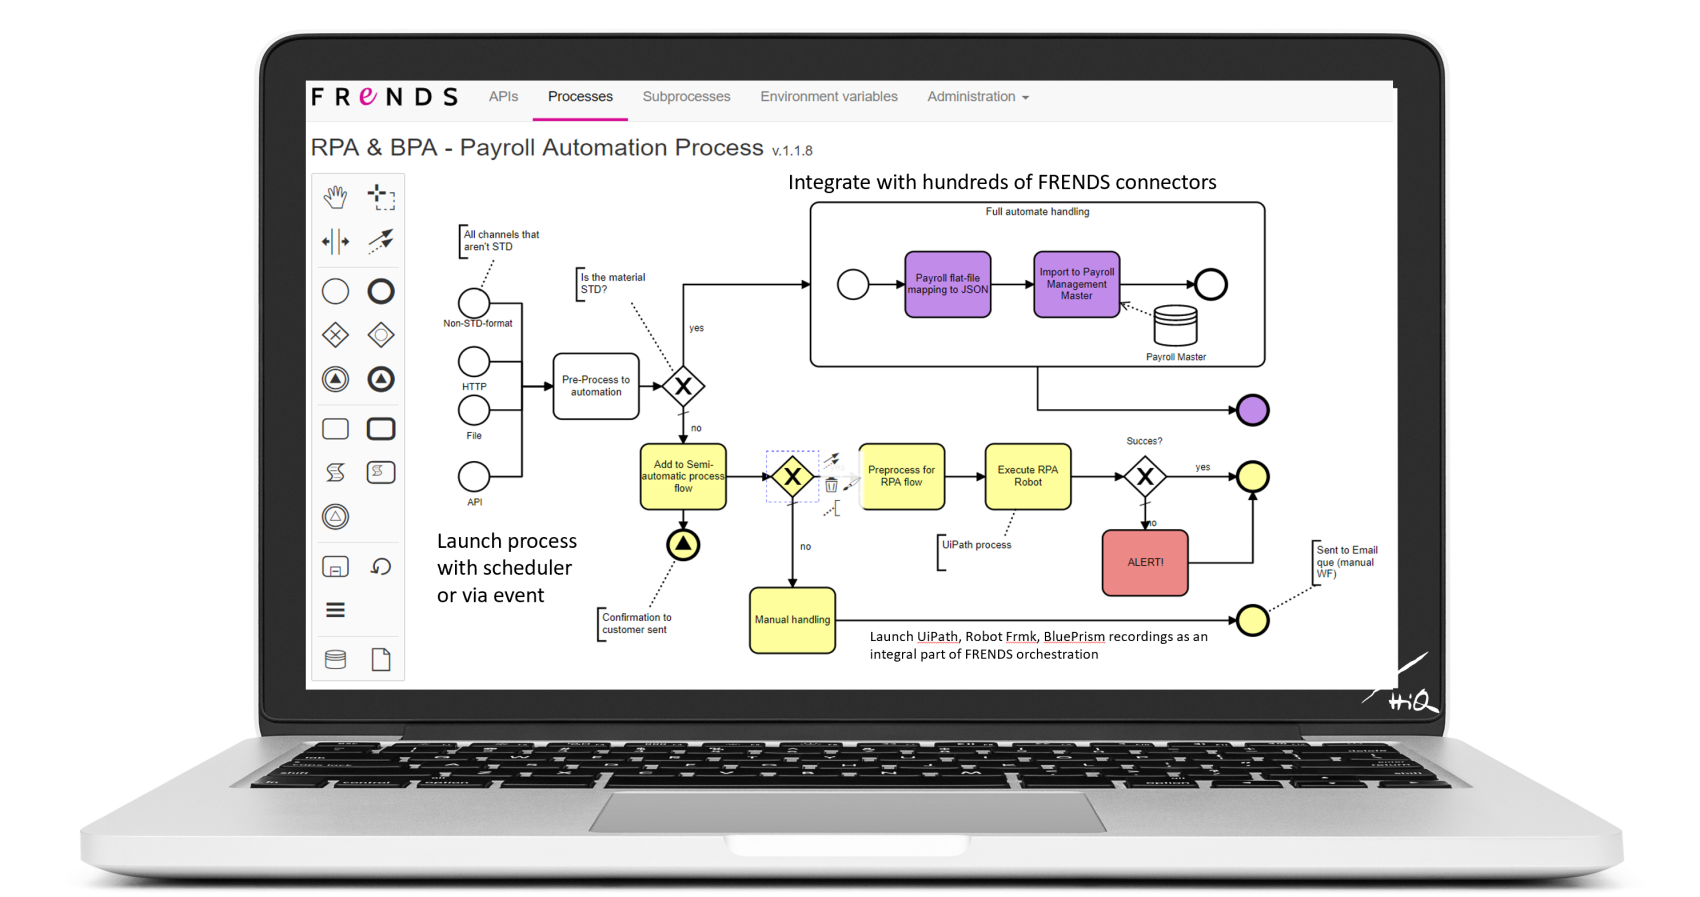 FRENDS combines BPA and RPA together into a single process automation